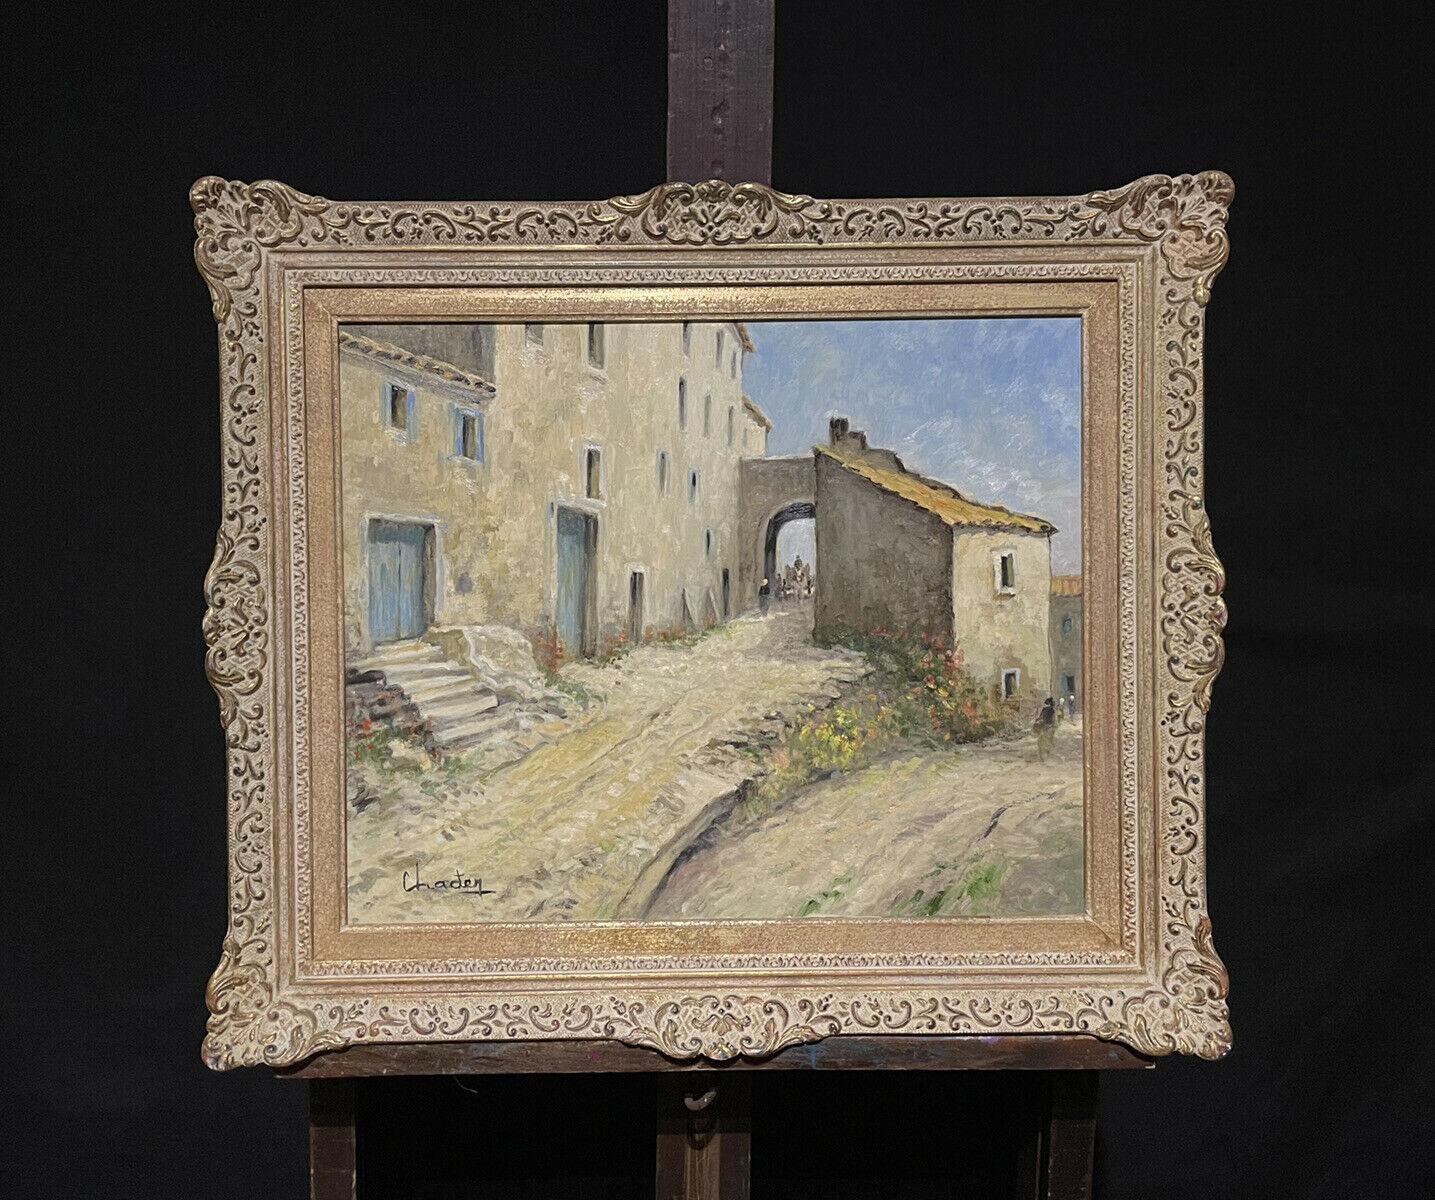 Artist/ School: French Impressionist School, 20th century, indistinctly signed

Title: Provencal country landscape

Medium:  signed oil painting on canvas, framed

Size:

framed:   23.5  x  27.5 inches
canvas:   19 x 23 inches

Provenance: private